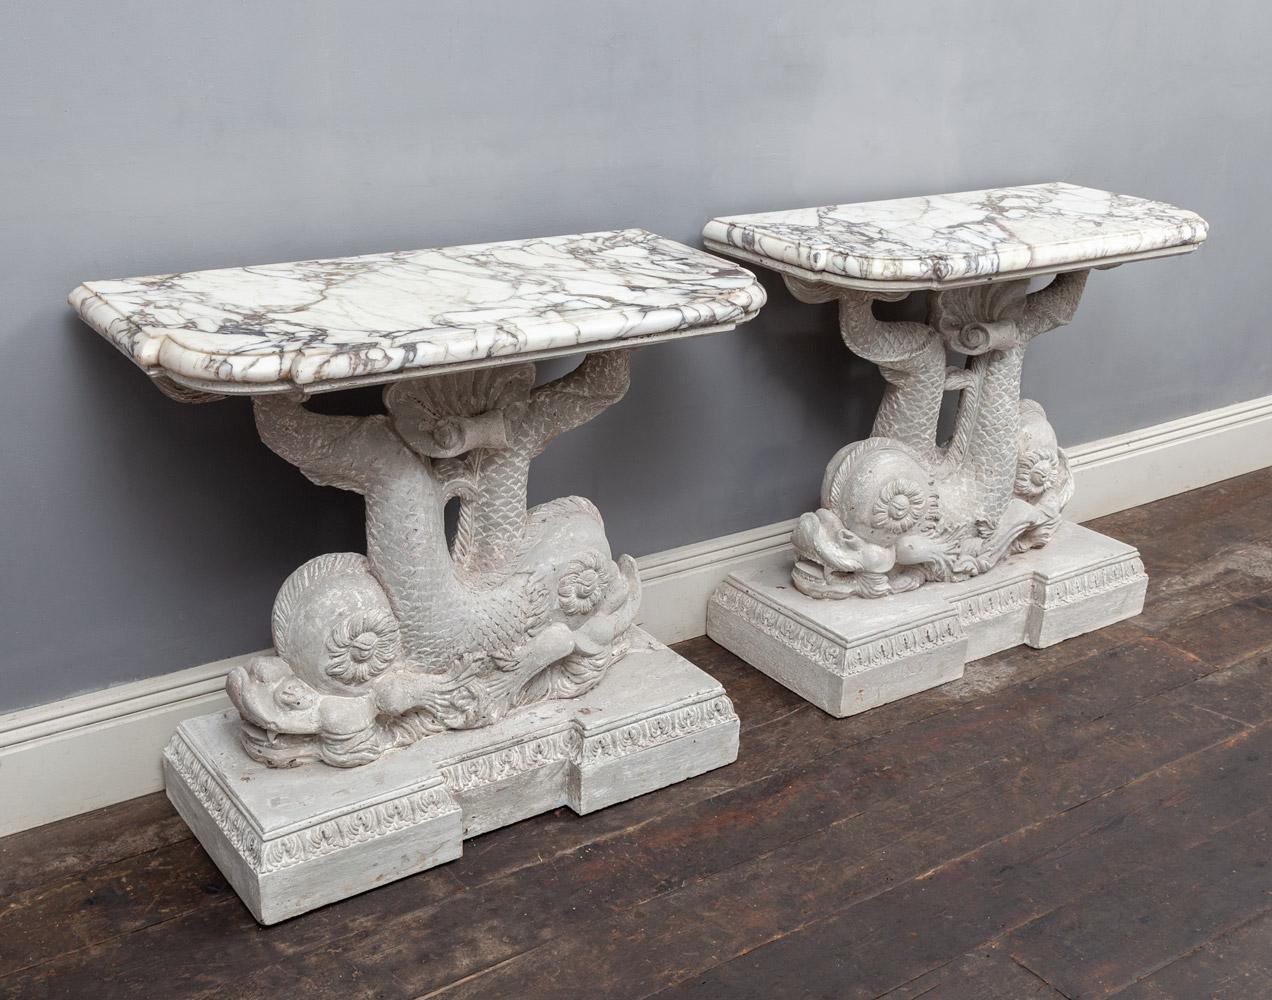 A magnificent antique pair of carved and painted wooden console tables, in the manner of William Kent. Two entwined stylized dolphins with centred scallop shells act as supports for the original Breccia Violetta marble tops. Their inapt faces,